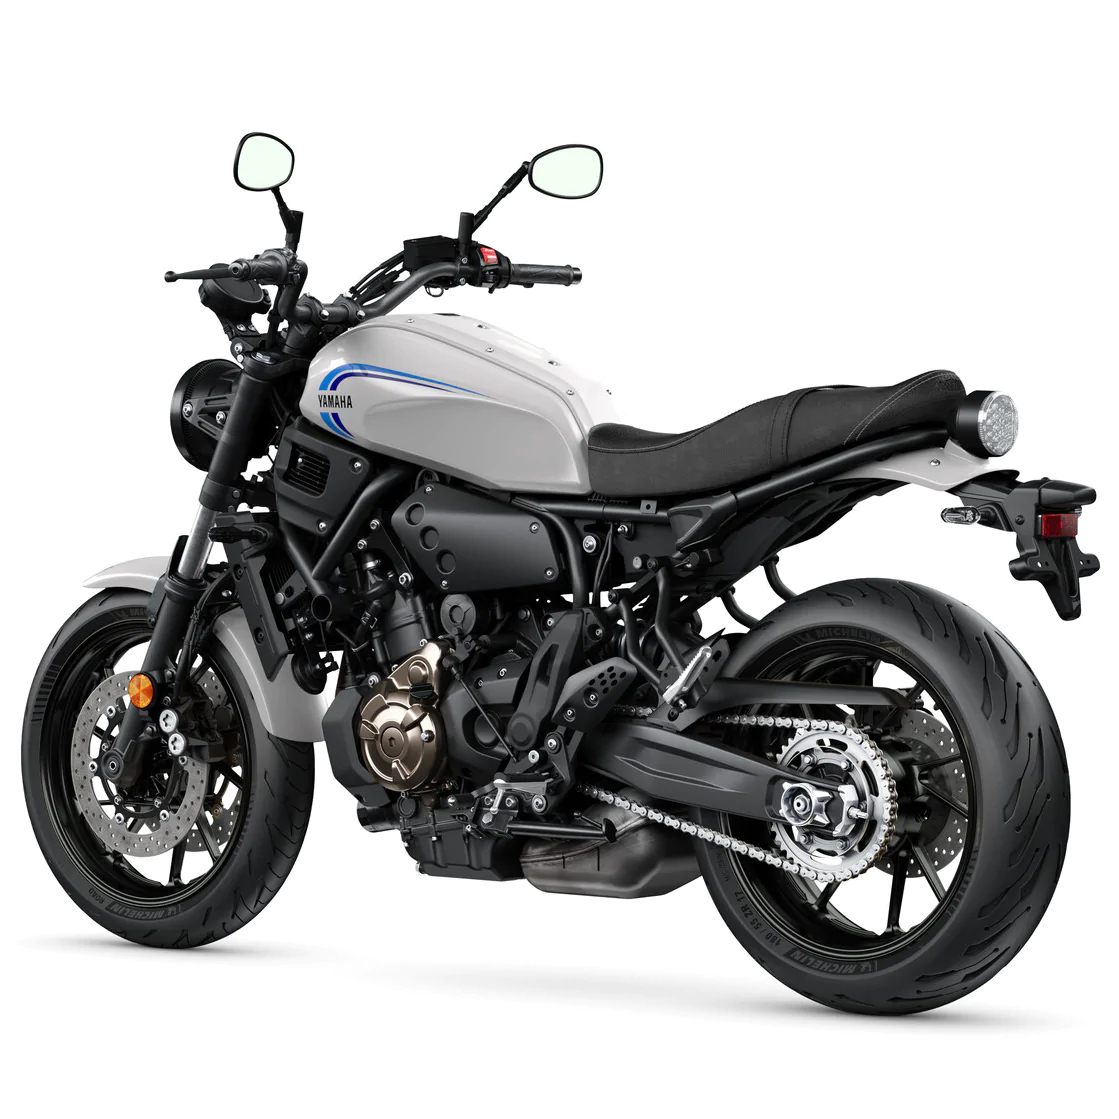 A 2020 Yamaha XSR700 motorcycle in white and blue